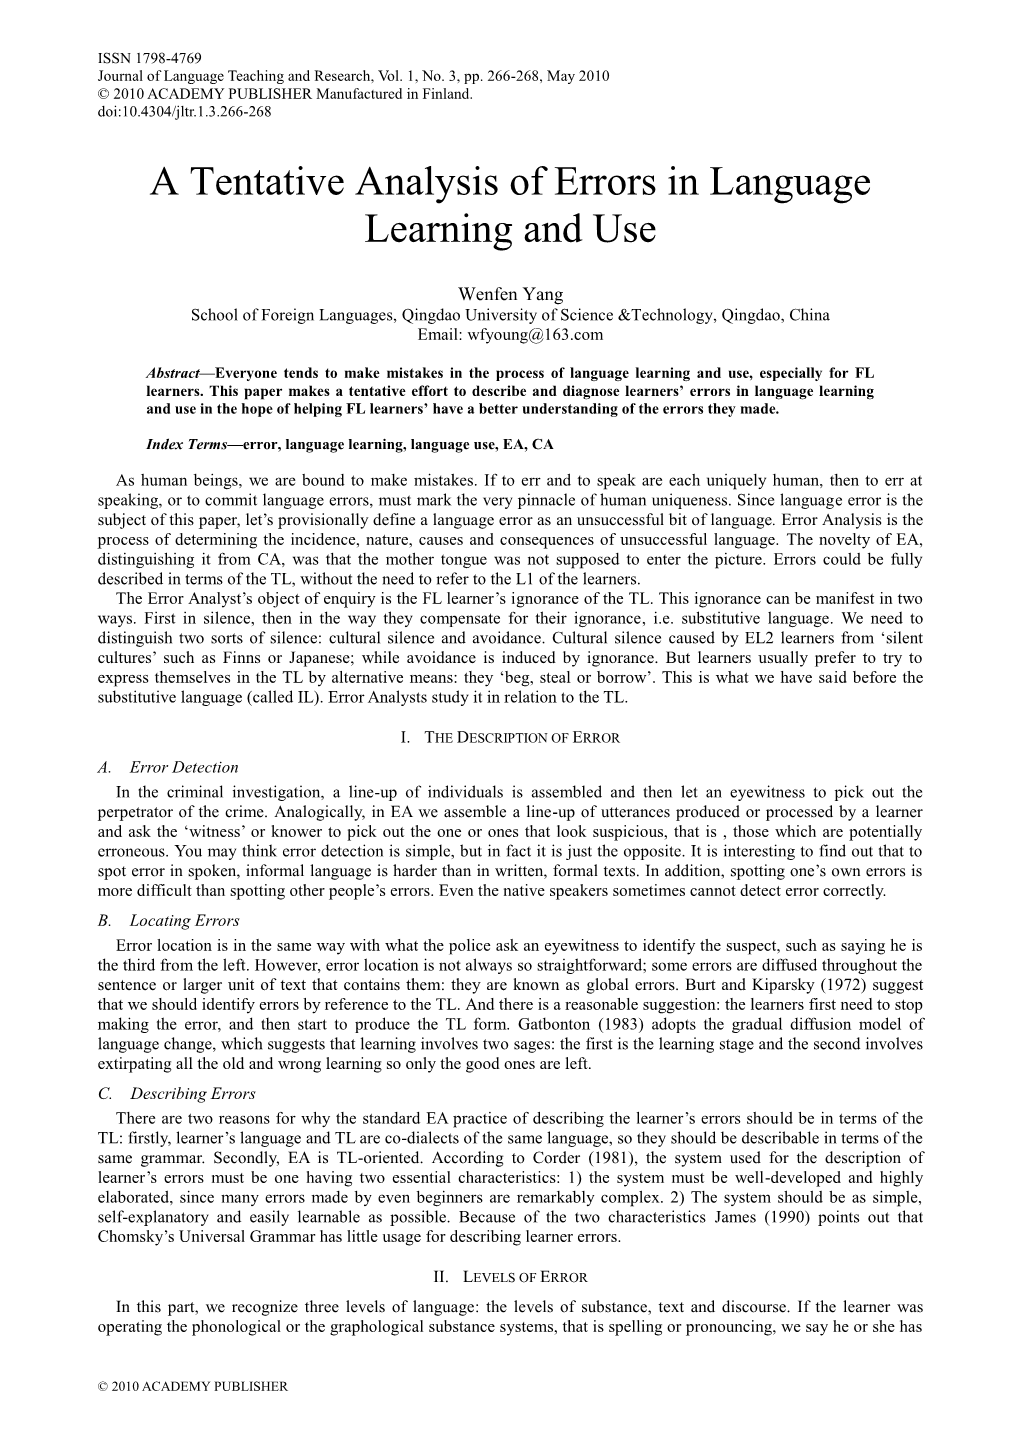 Errors in Language Learning and Use: Exploring Error Analysis